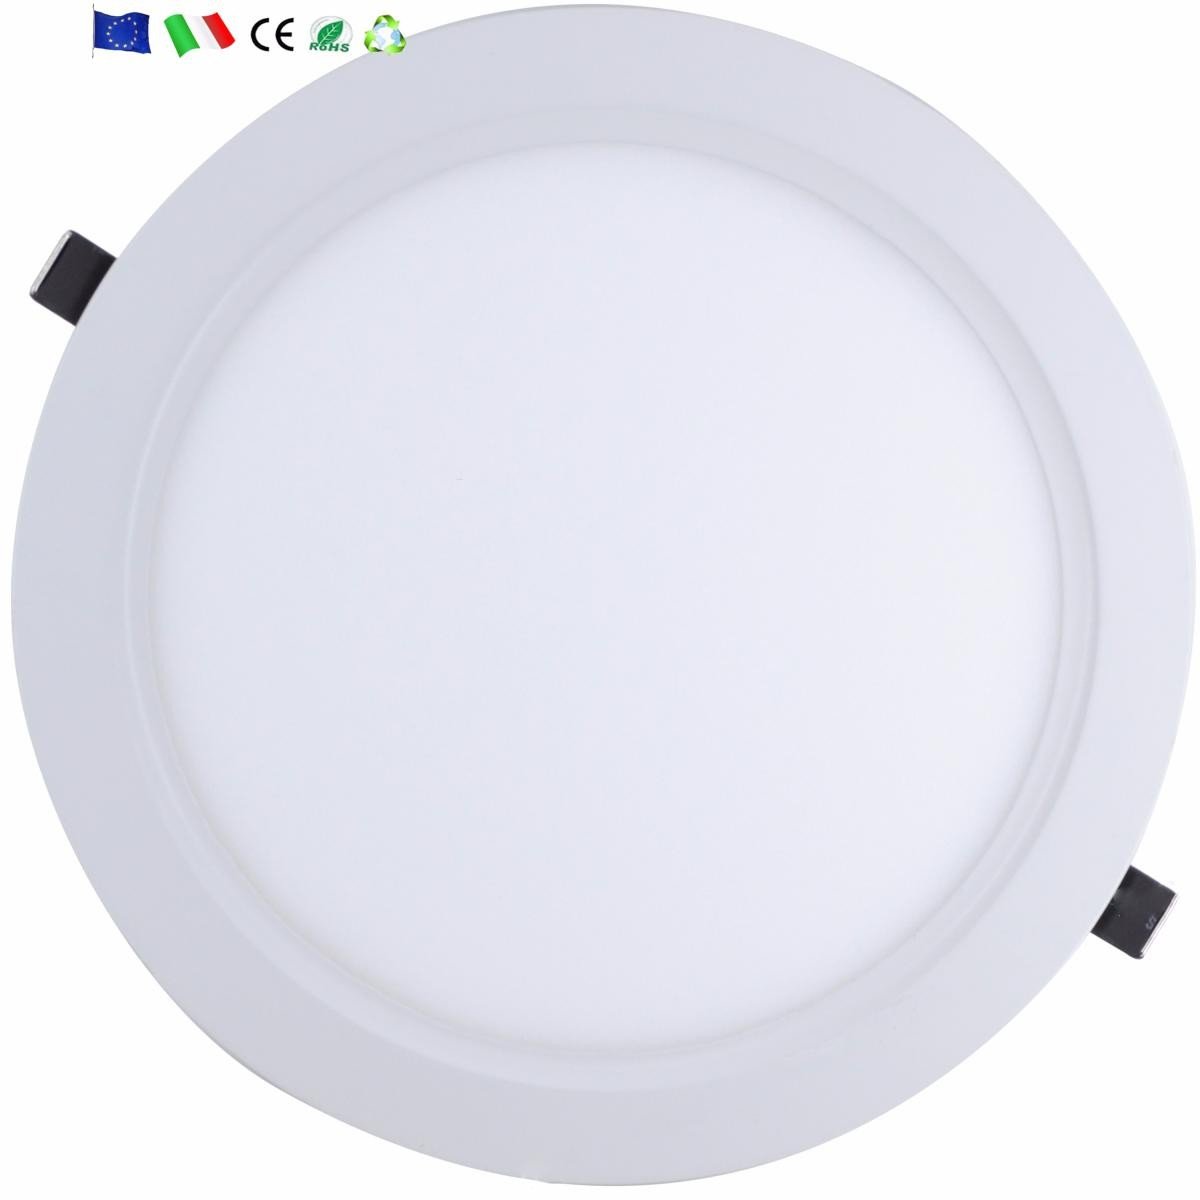 Downlight Dalle LED 24W Extra Plate Ronde BLANC - Silumen